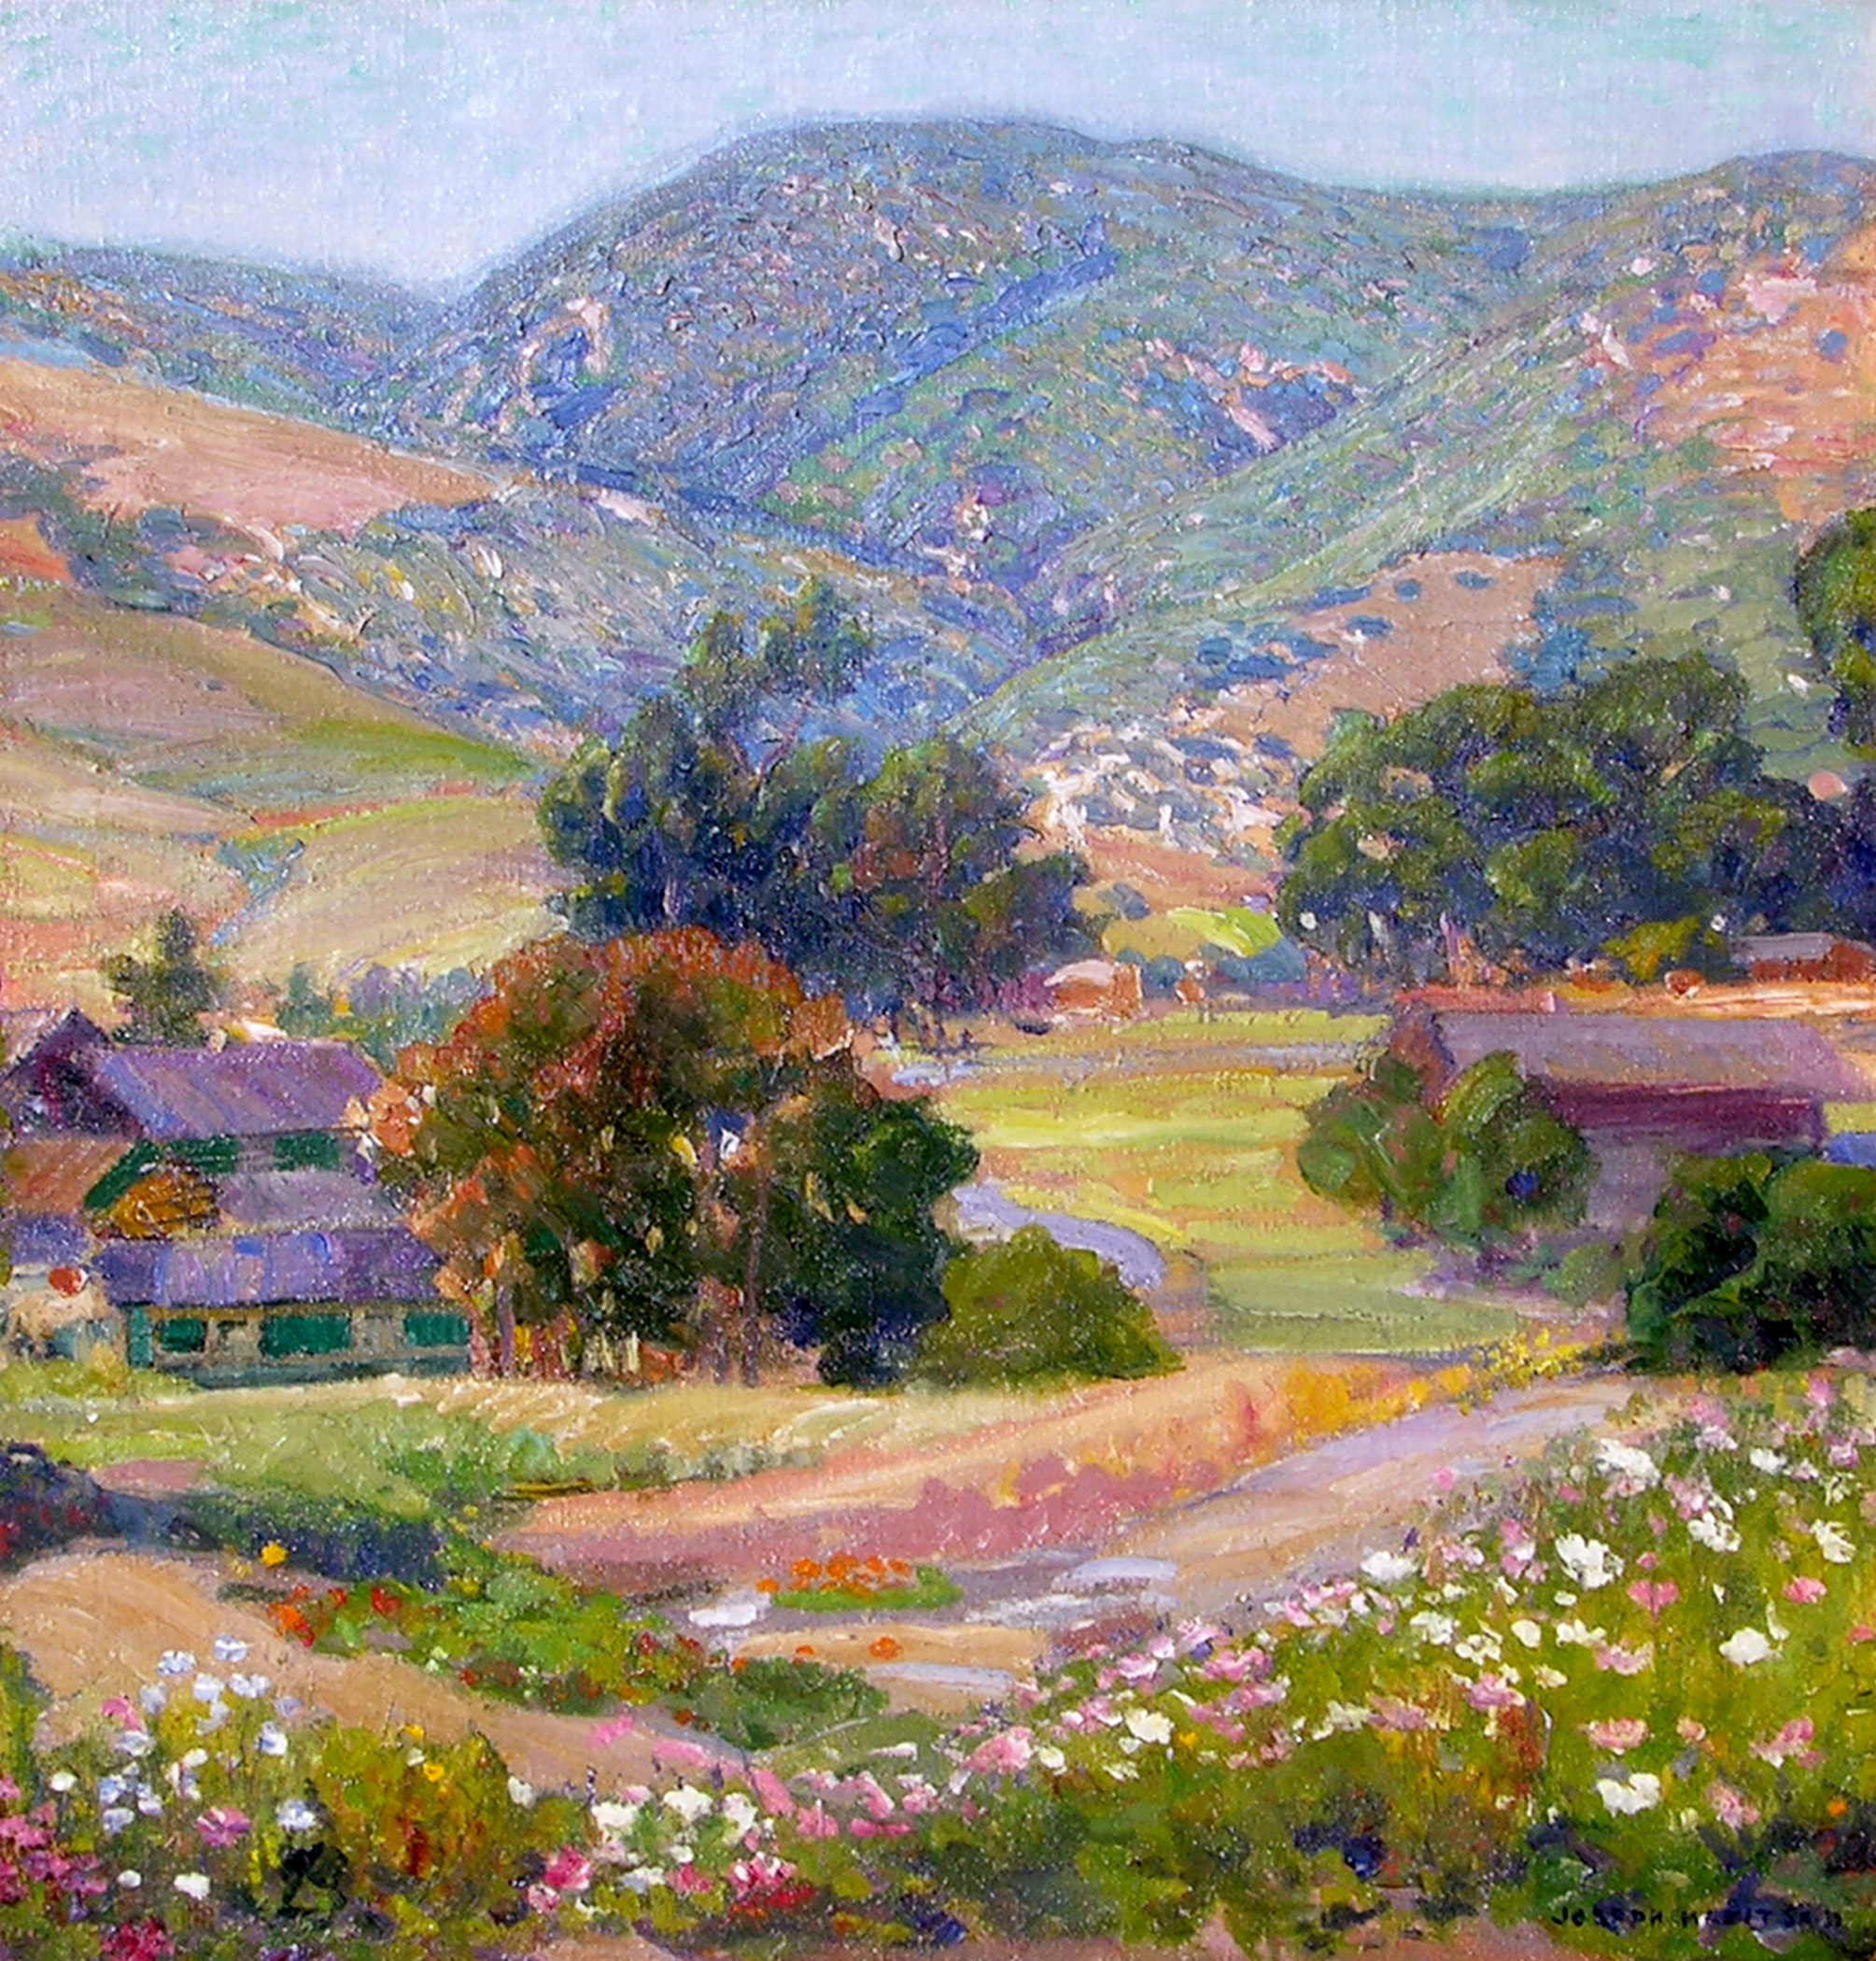    Jeweled Hills   / Oil on Canvas, 26 x 24 in. / Private Collection 